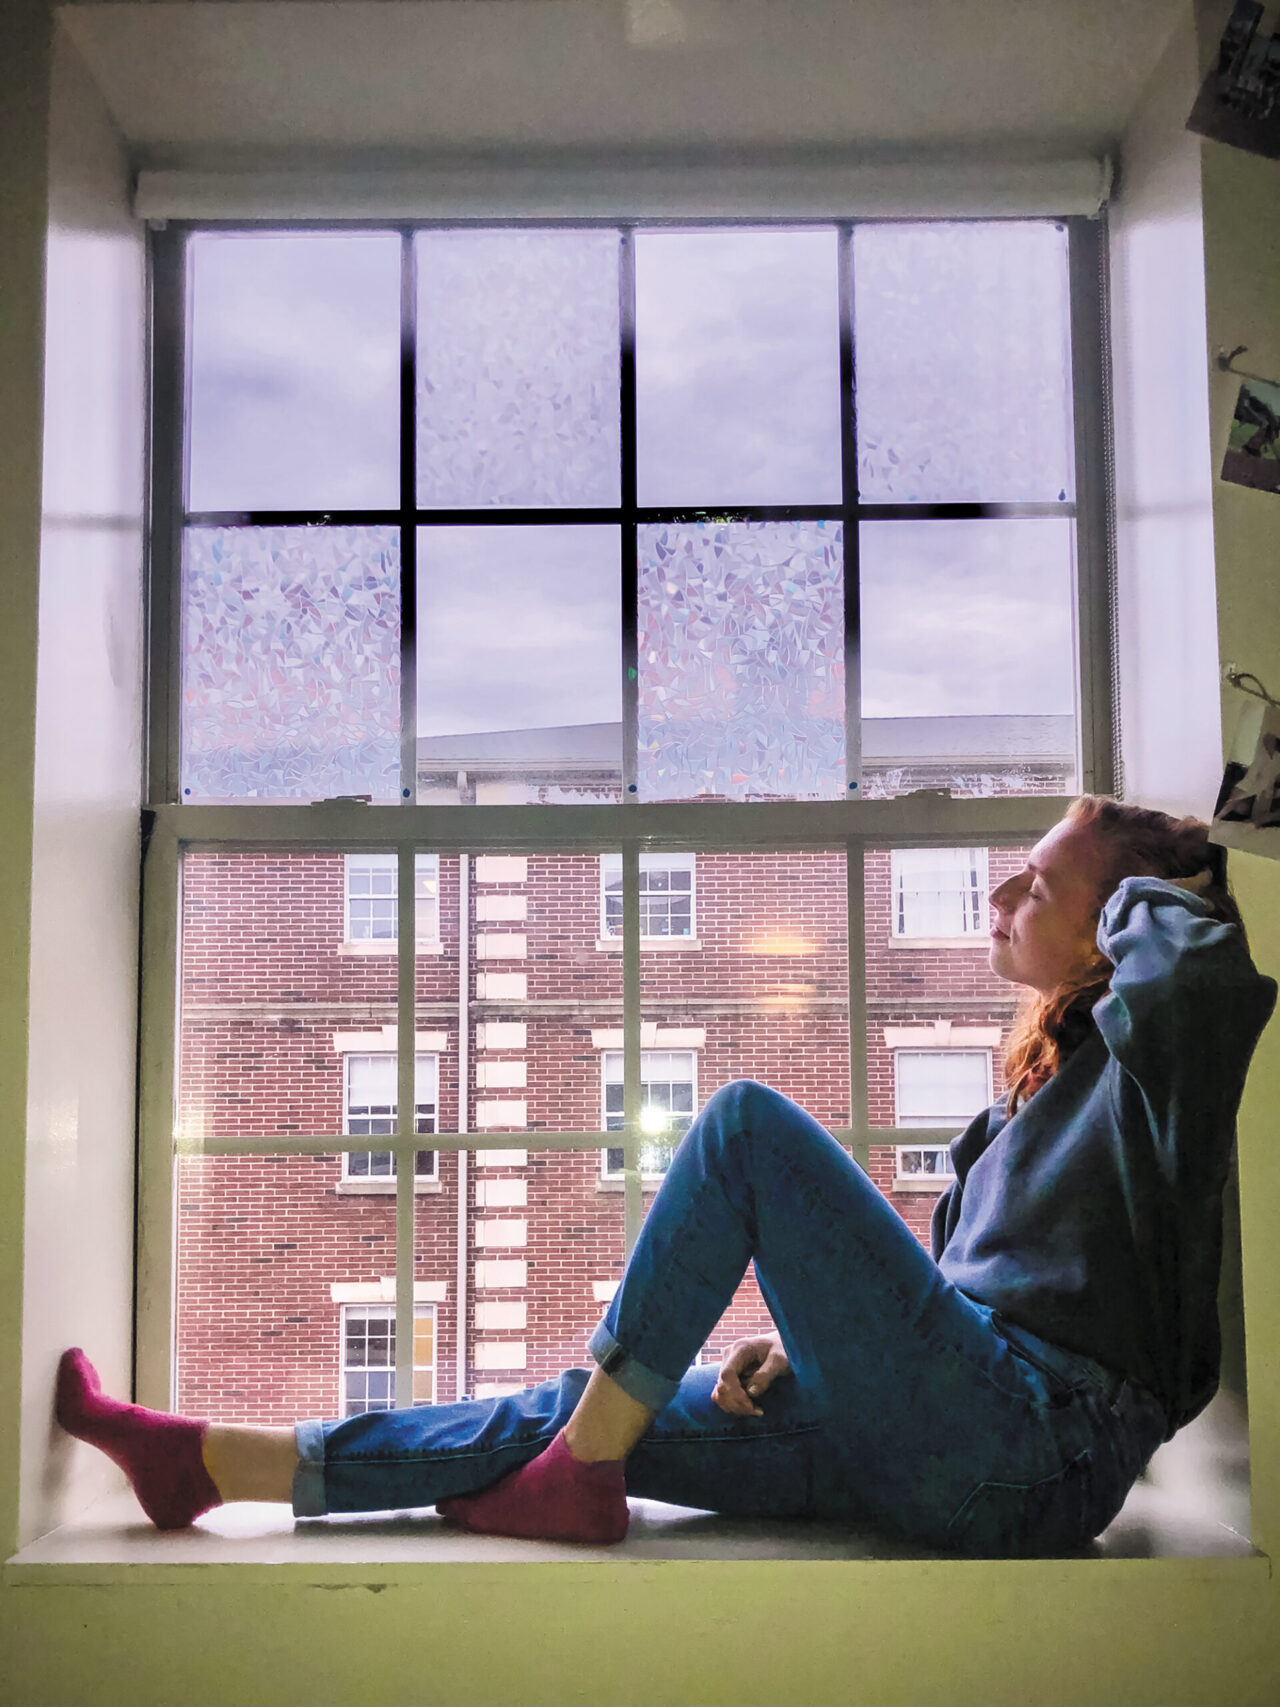 A young woman sprawls in a window seat, taking a rest between classes.